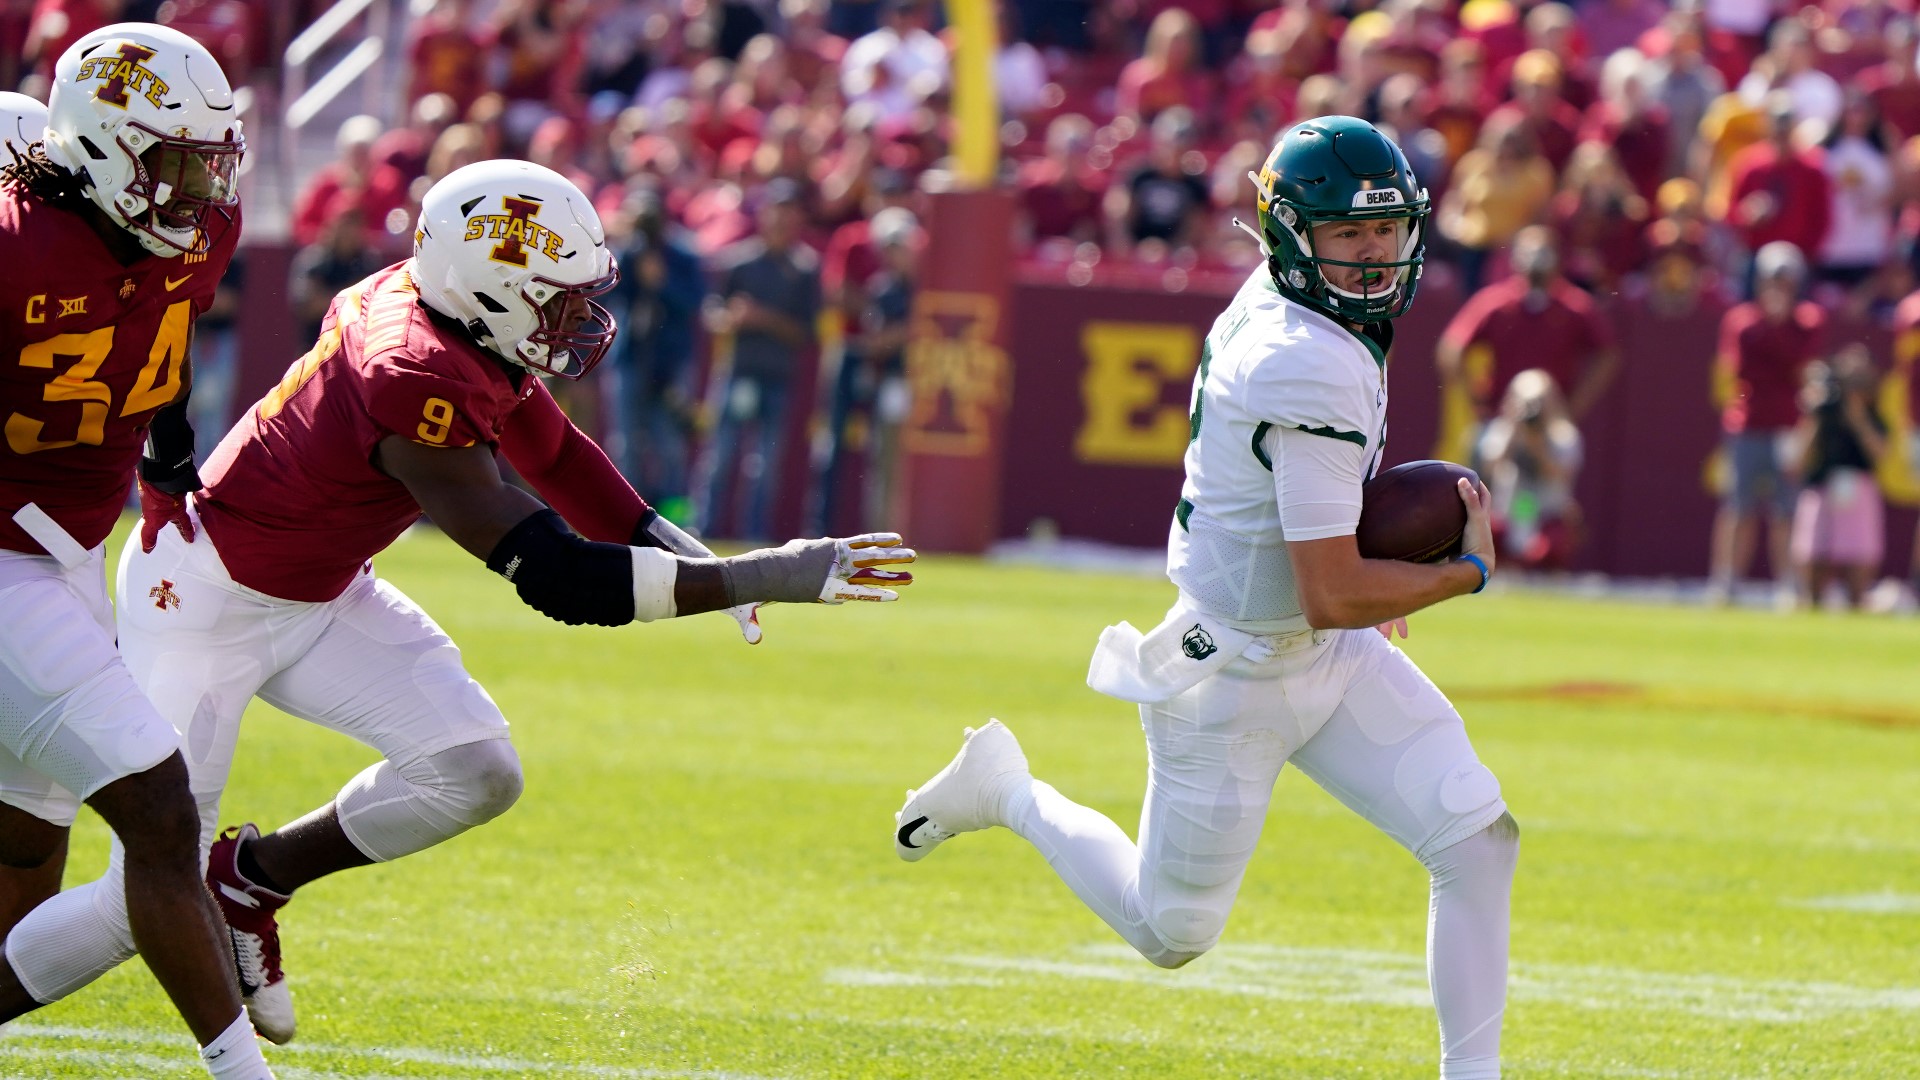 The loss snapped the Cyclones’ 11-game home winning streak against conference rivals.